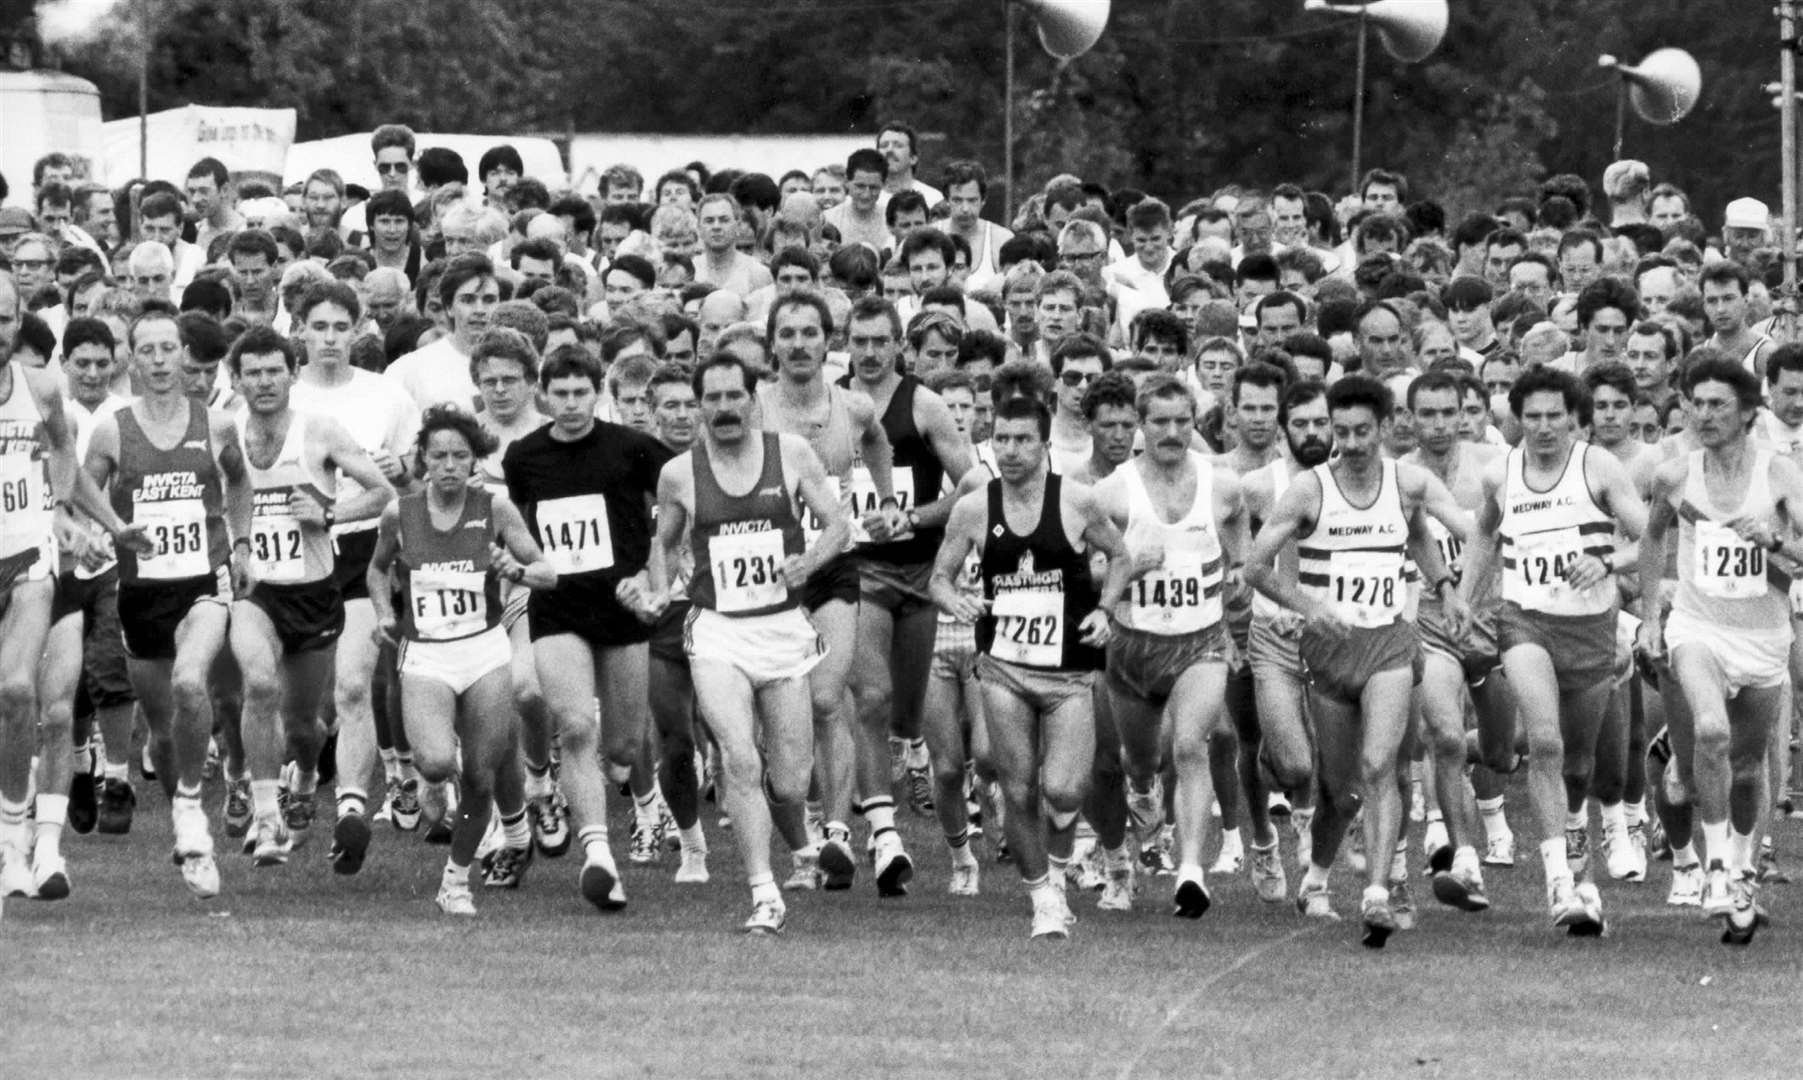 Runners set off on the Maidstone Marathon in 1990. The first of these events was held in 1983 and the last race was in 1993